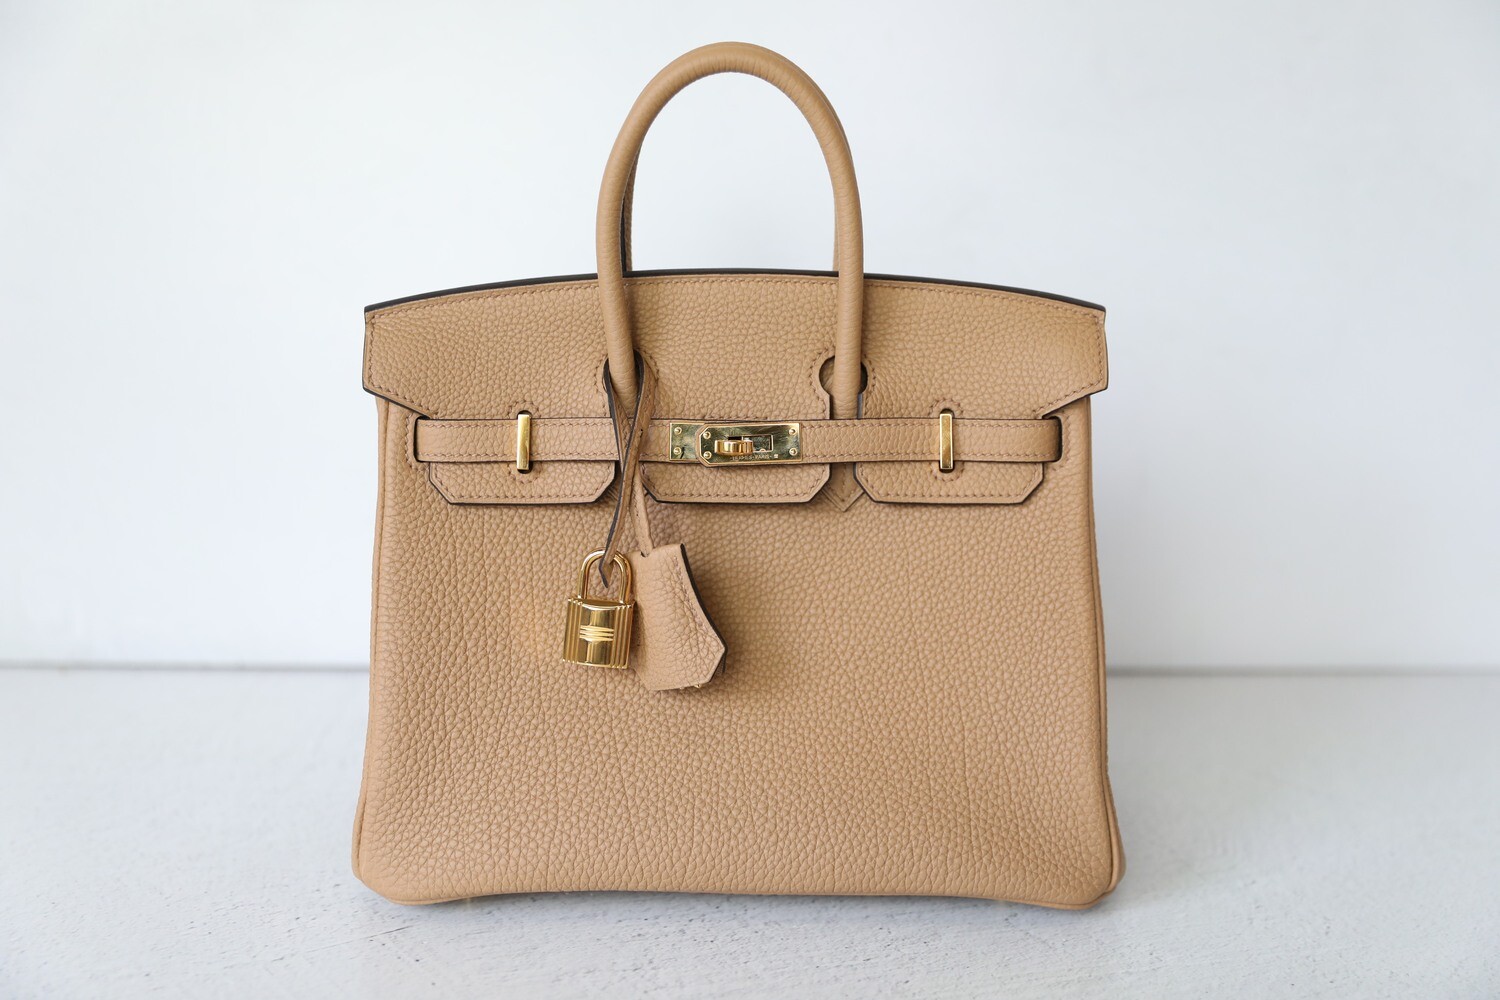 Hermes Birkin 25, Chai Leather with Gold Hardware, Preowned in Box